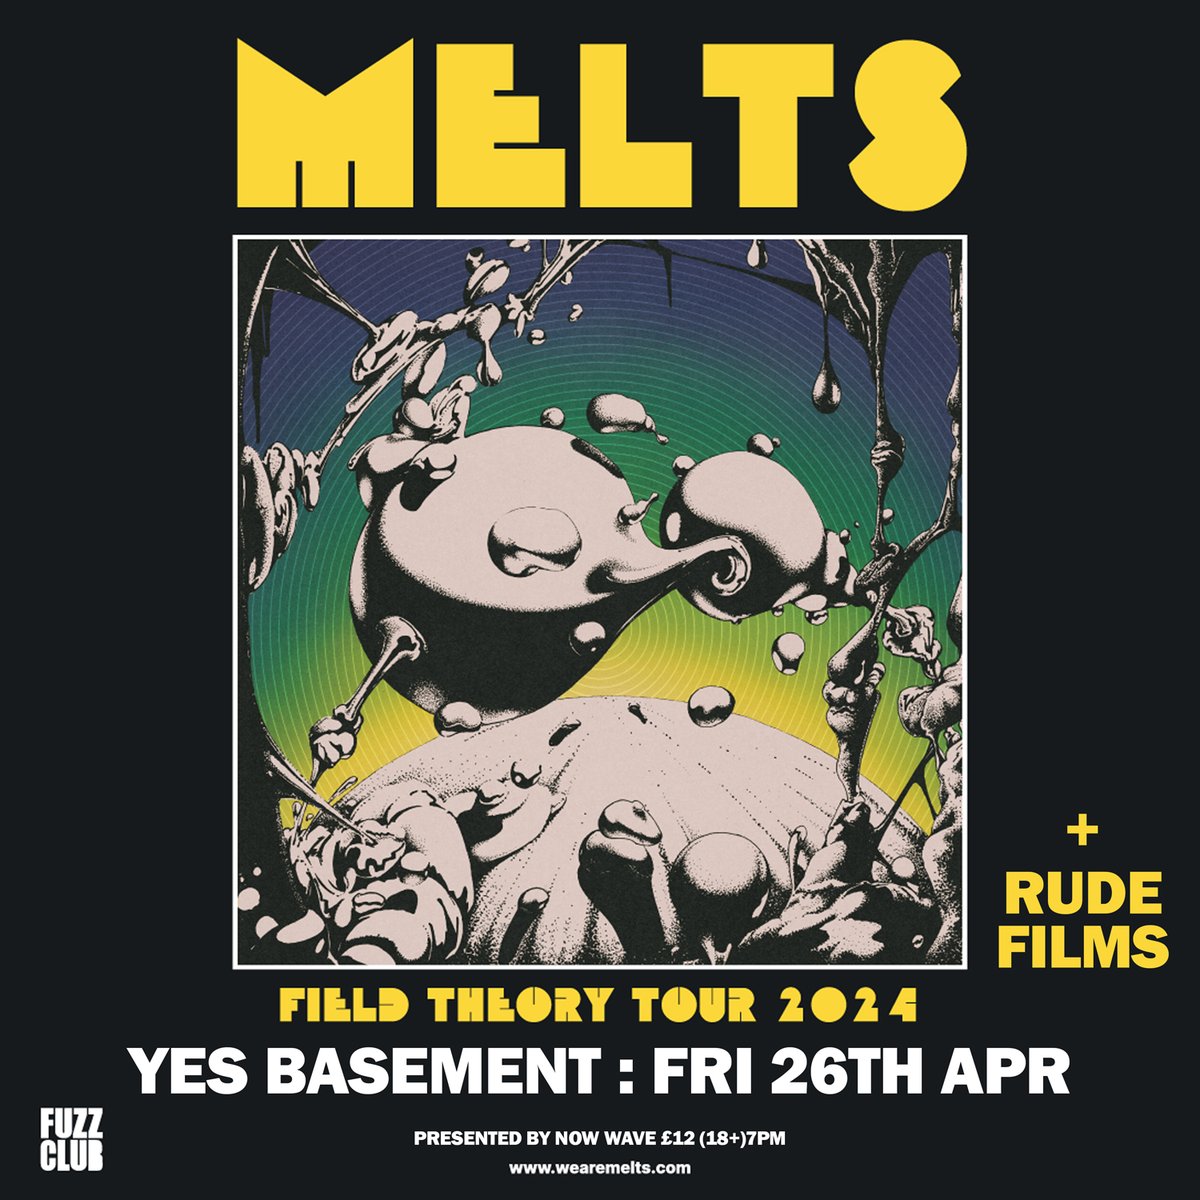 STAGE TIMES TONIGHT AT @yes_mcr DOORS - 7PM RUDE FILMS - 8PM MELTS - 9PM Final adv tickets here -> seetickets.com/event/melts/ye…